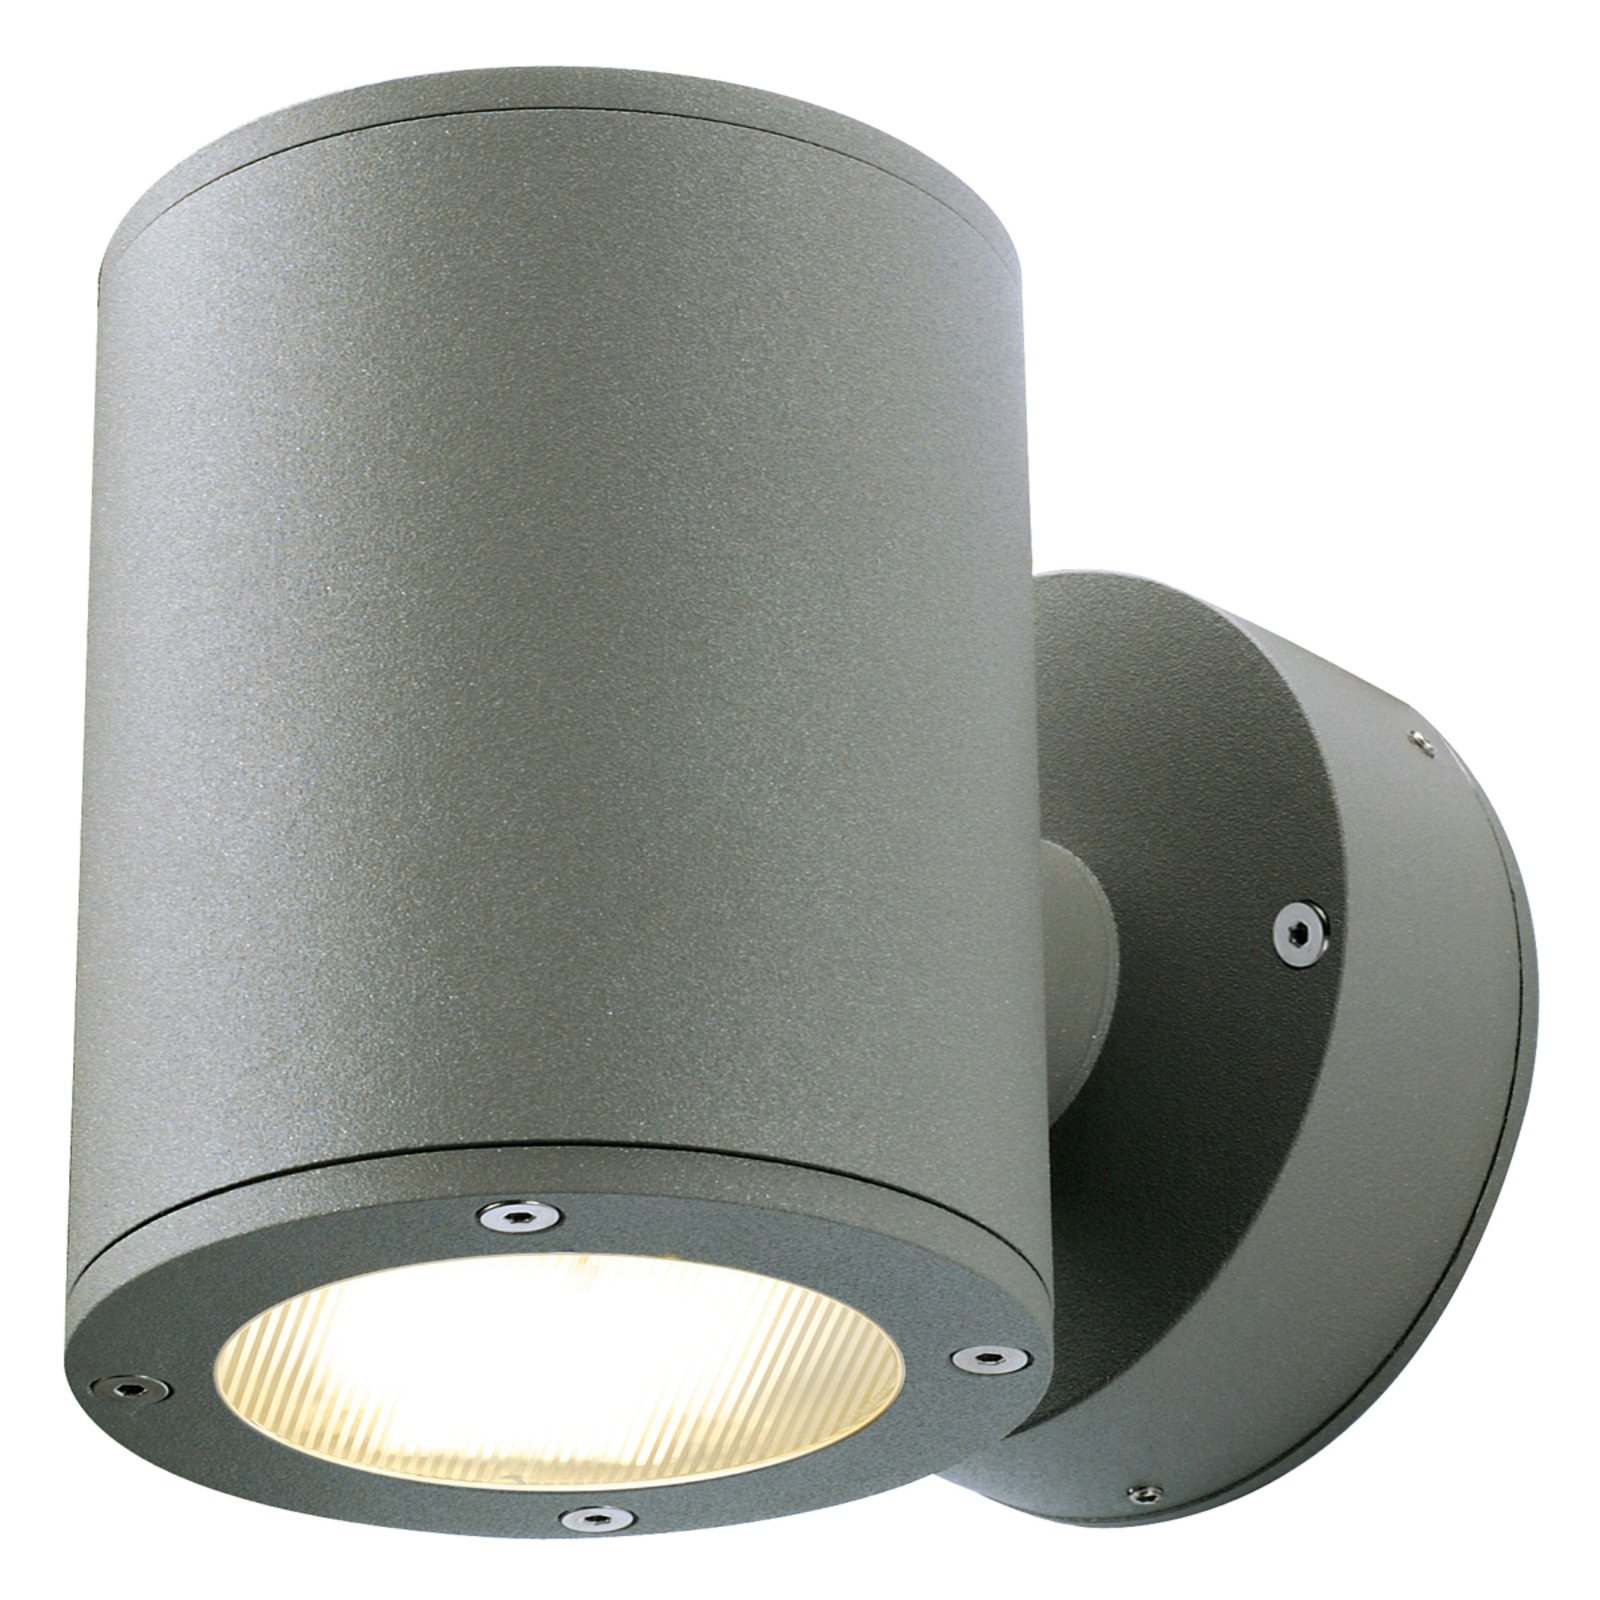 SLV Sitra Up-Down LED outdoor wall lamp, anthracite